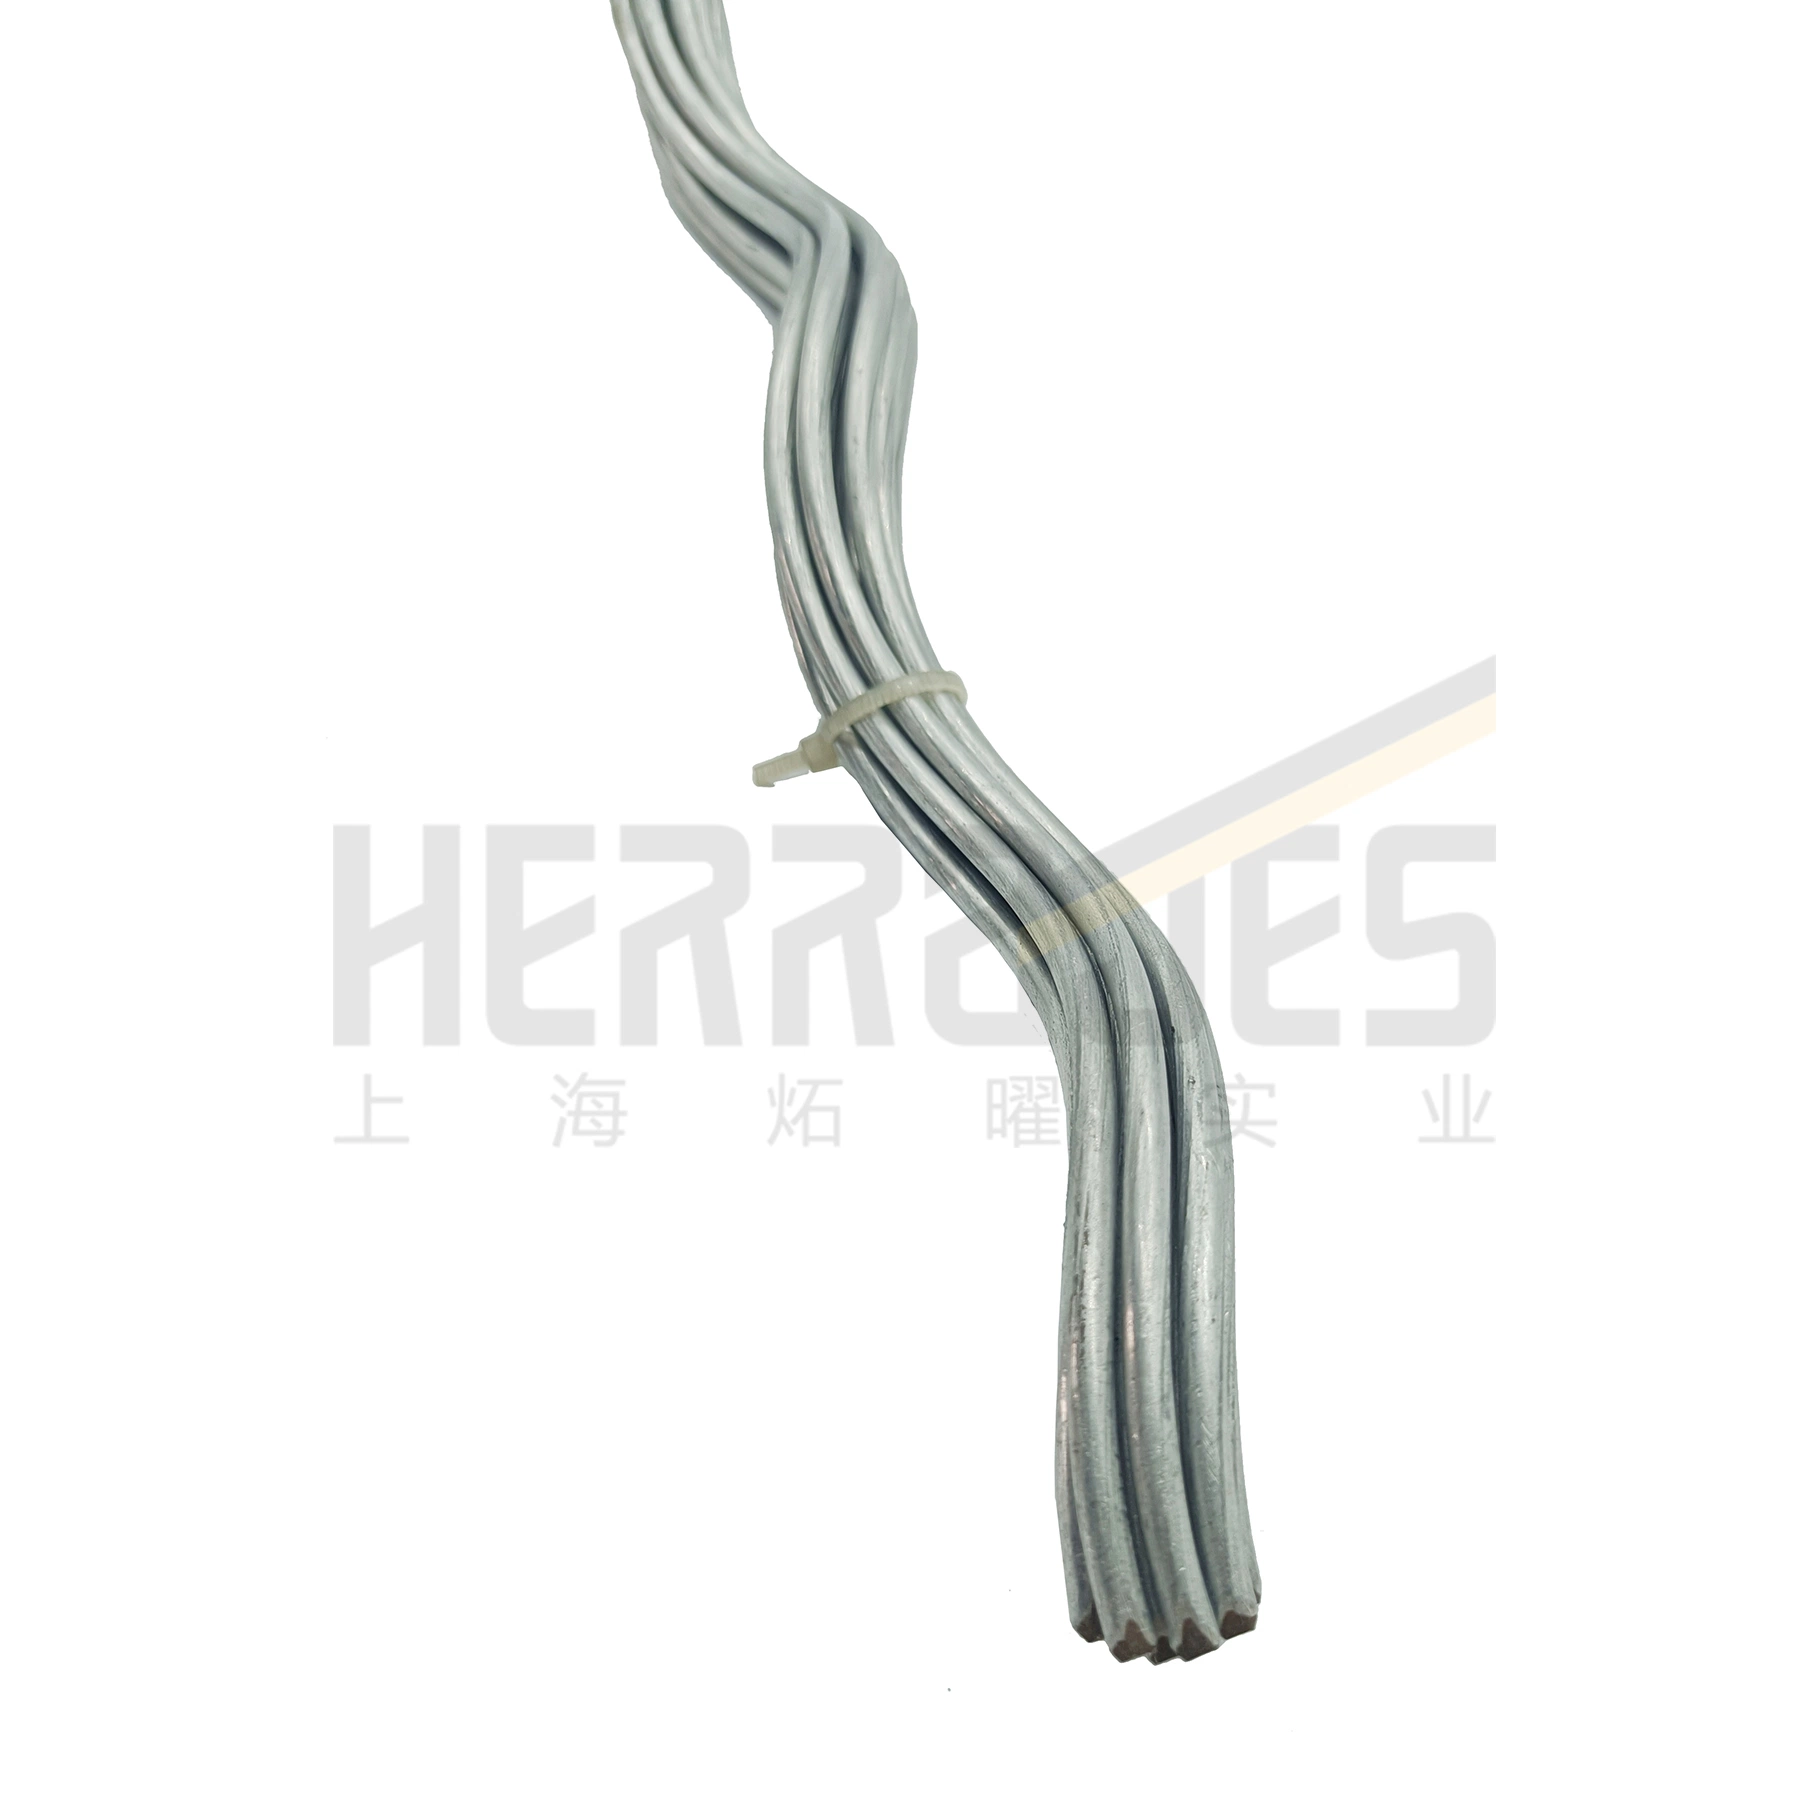 Helical Splice Dead End Guy Grip Cable Preformed Armor Rods